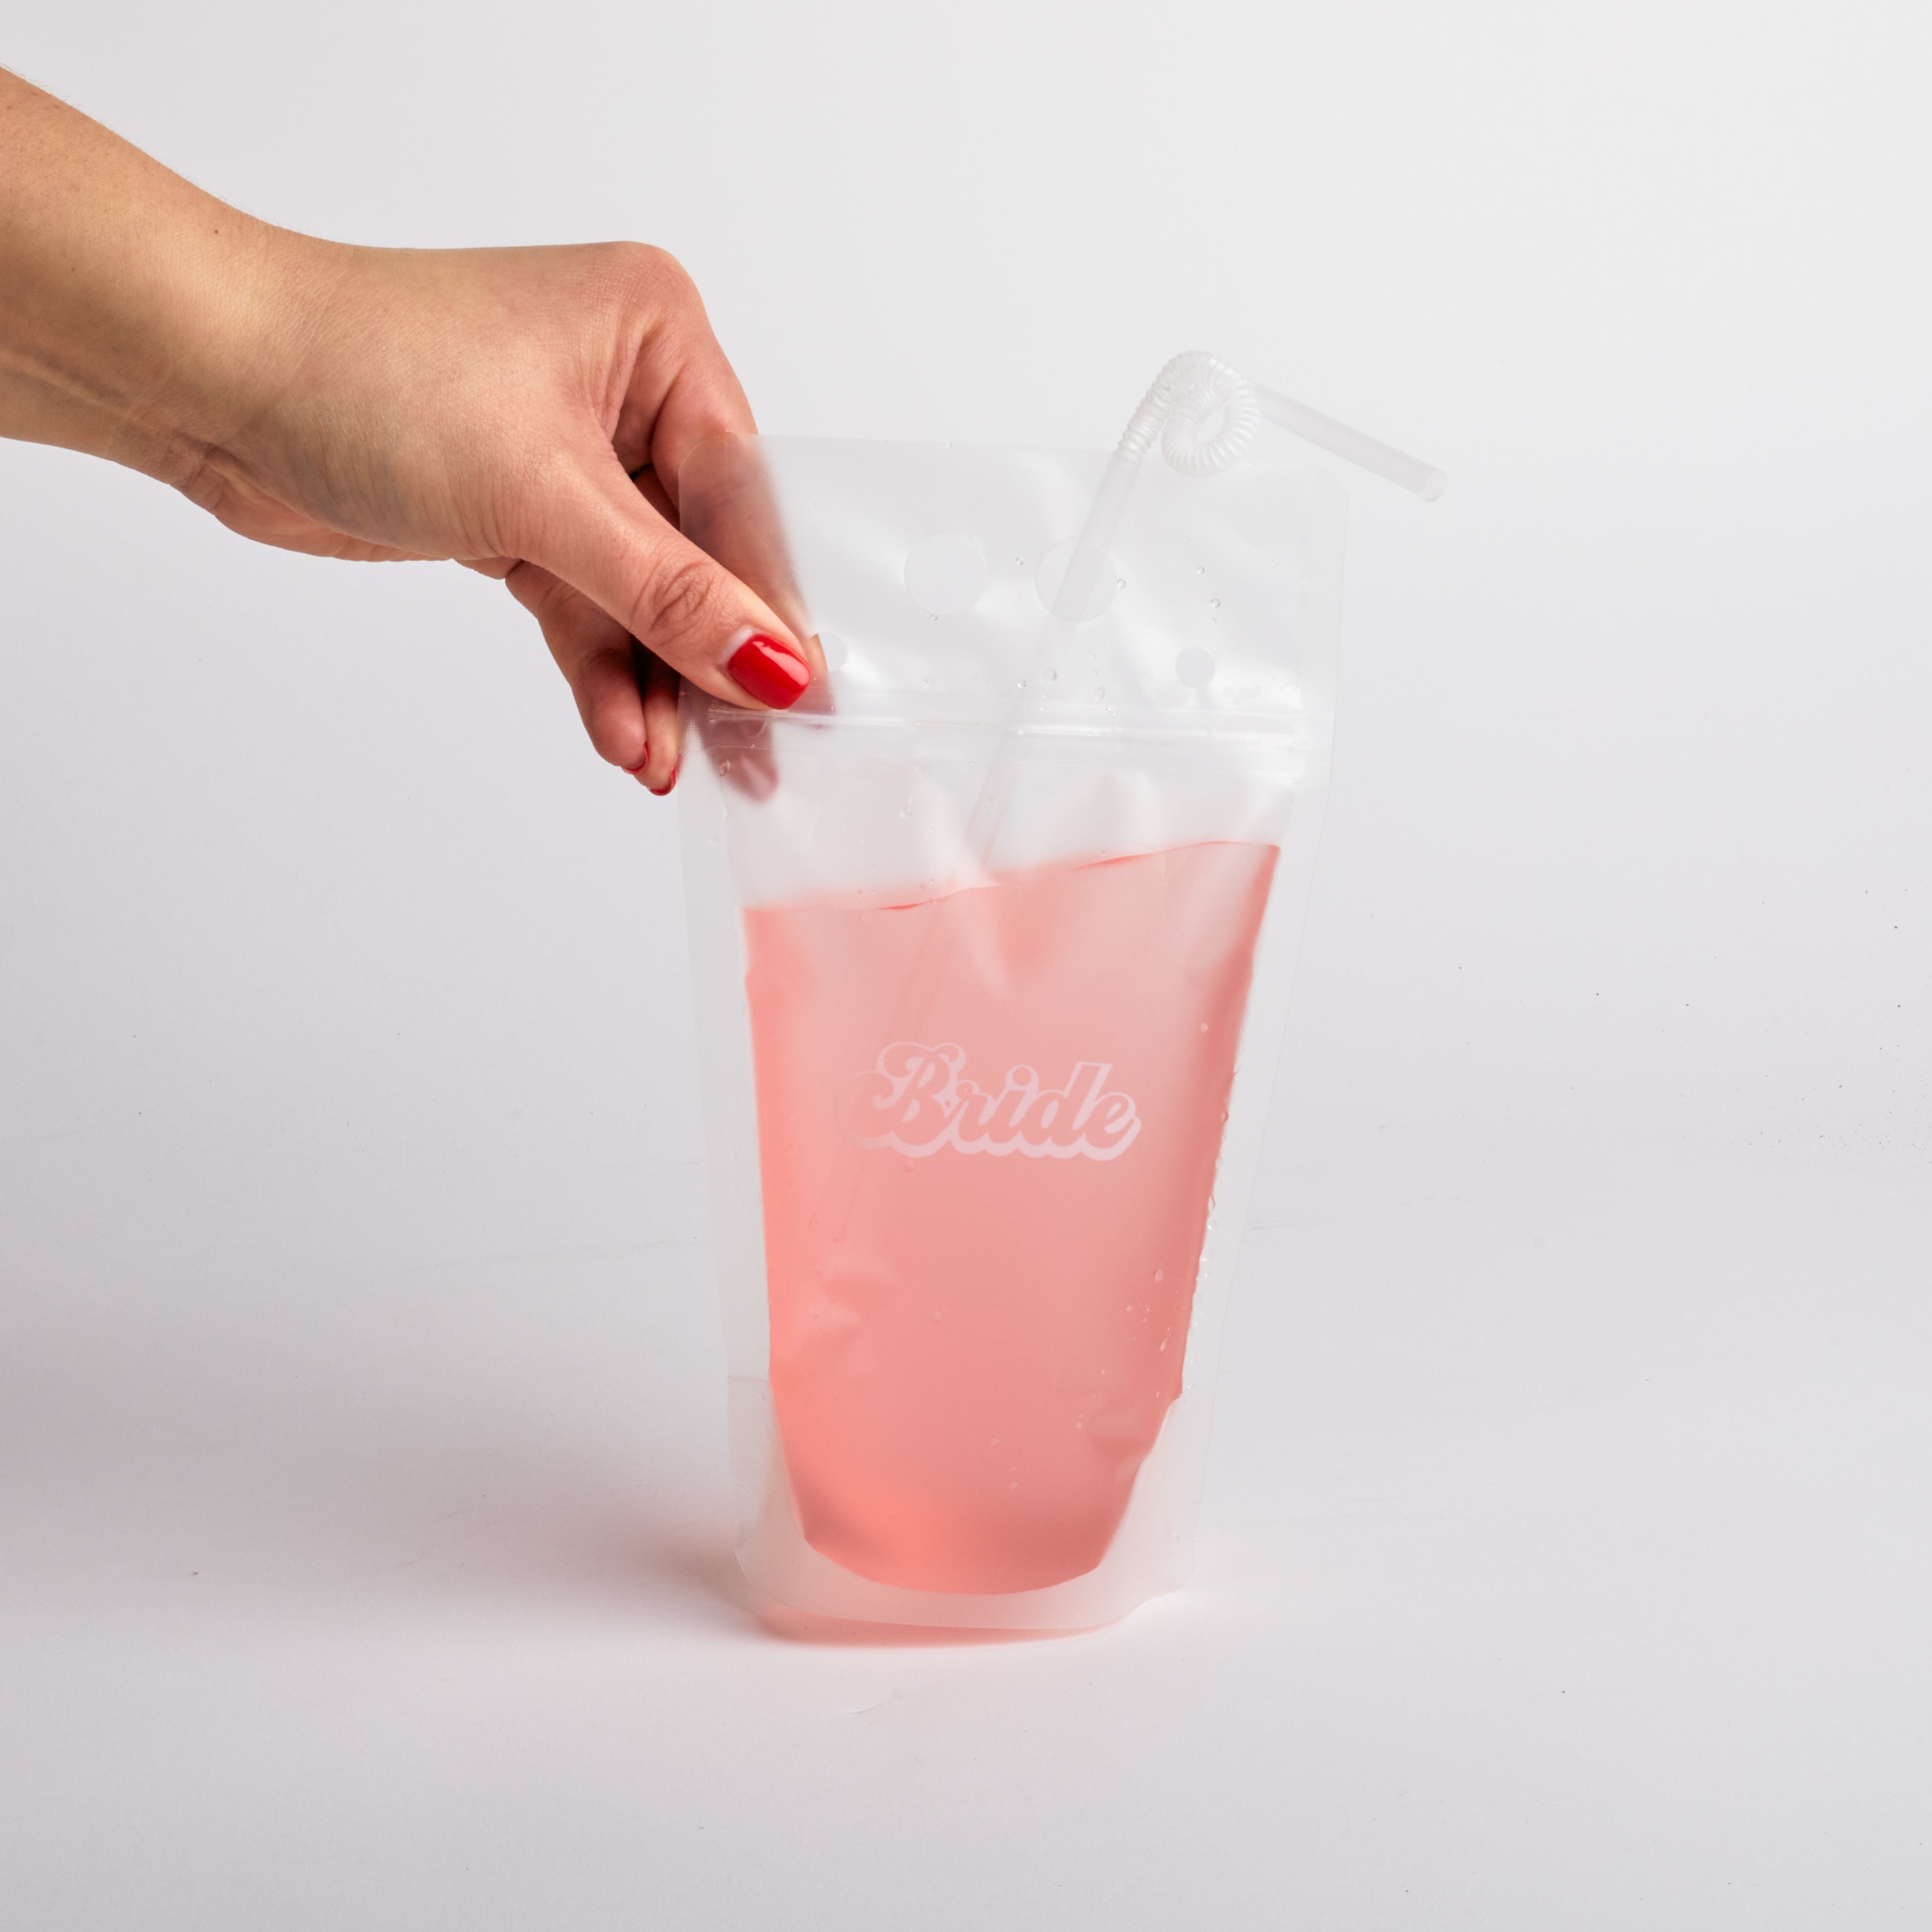 Hand holding &quot;bride&quot; drink pouch.